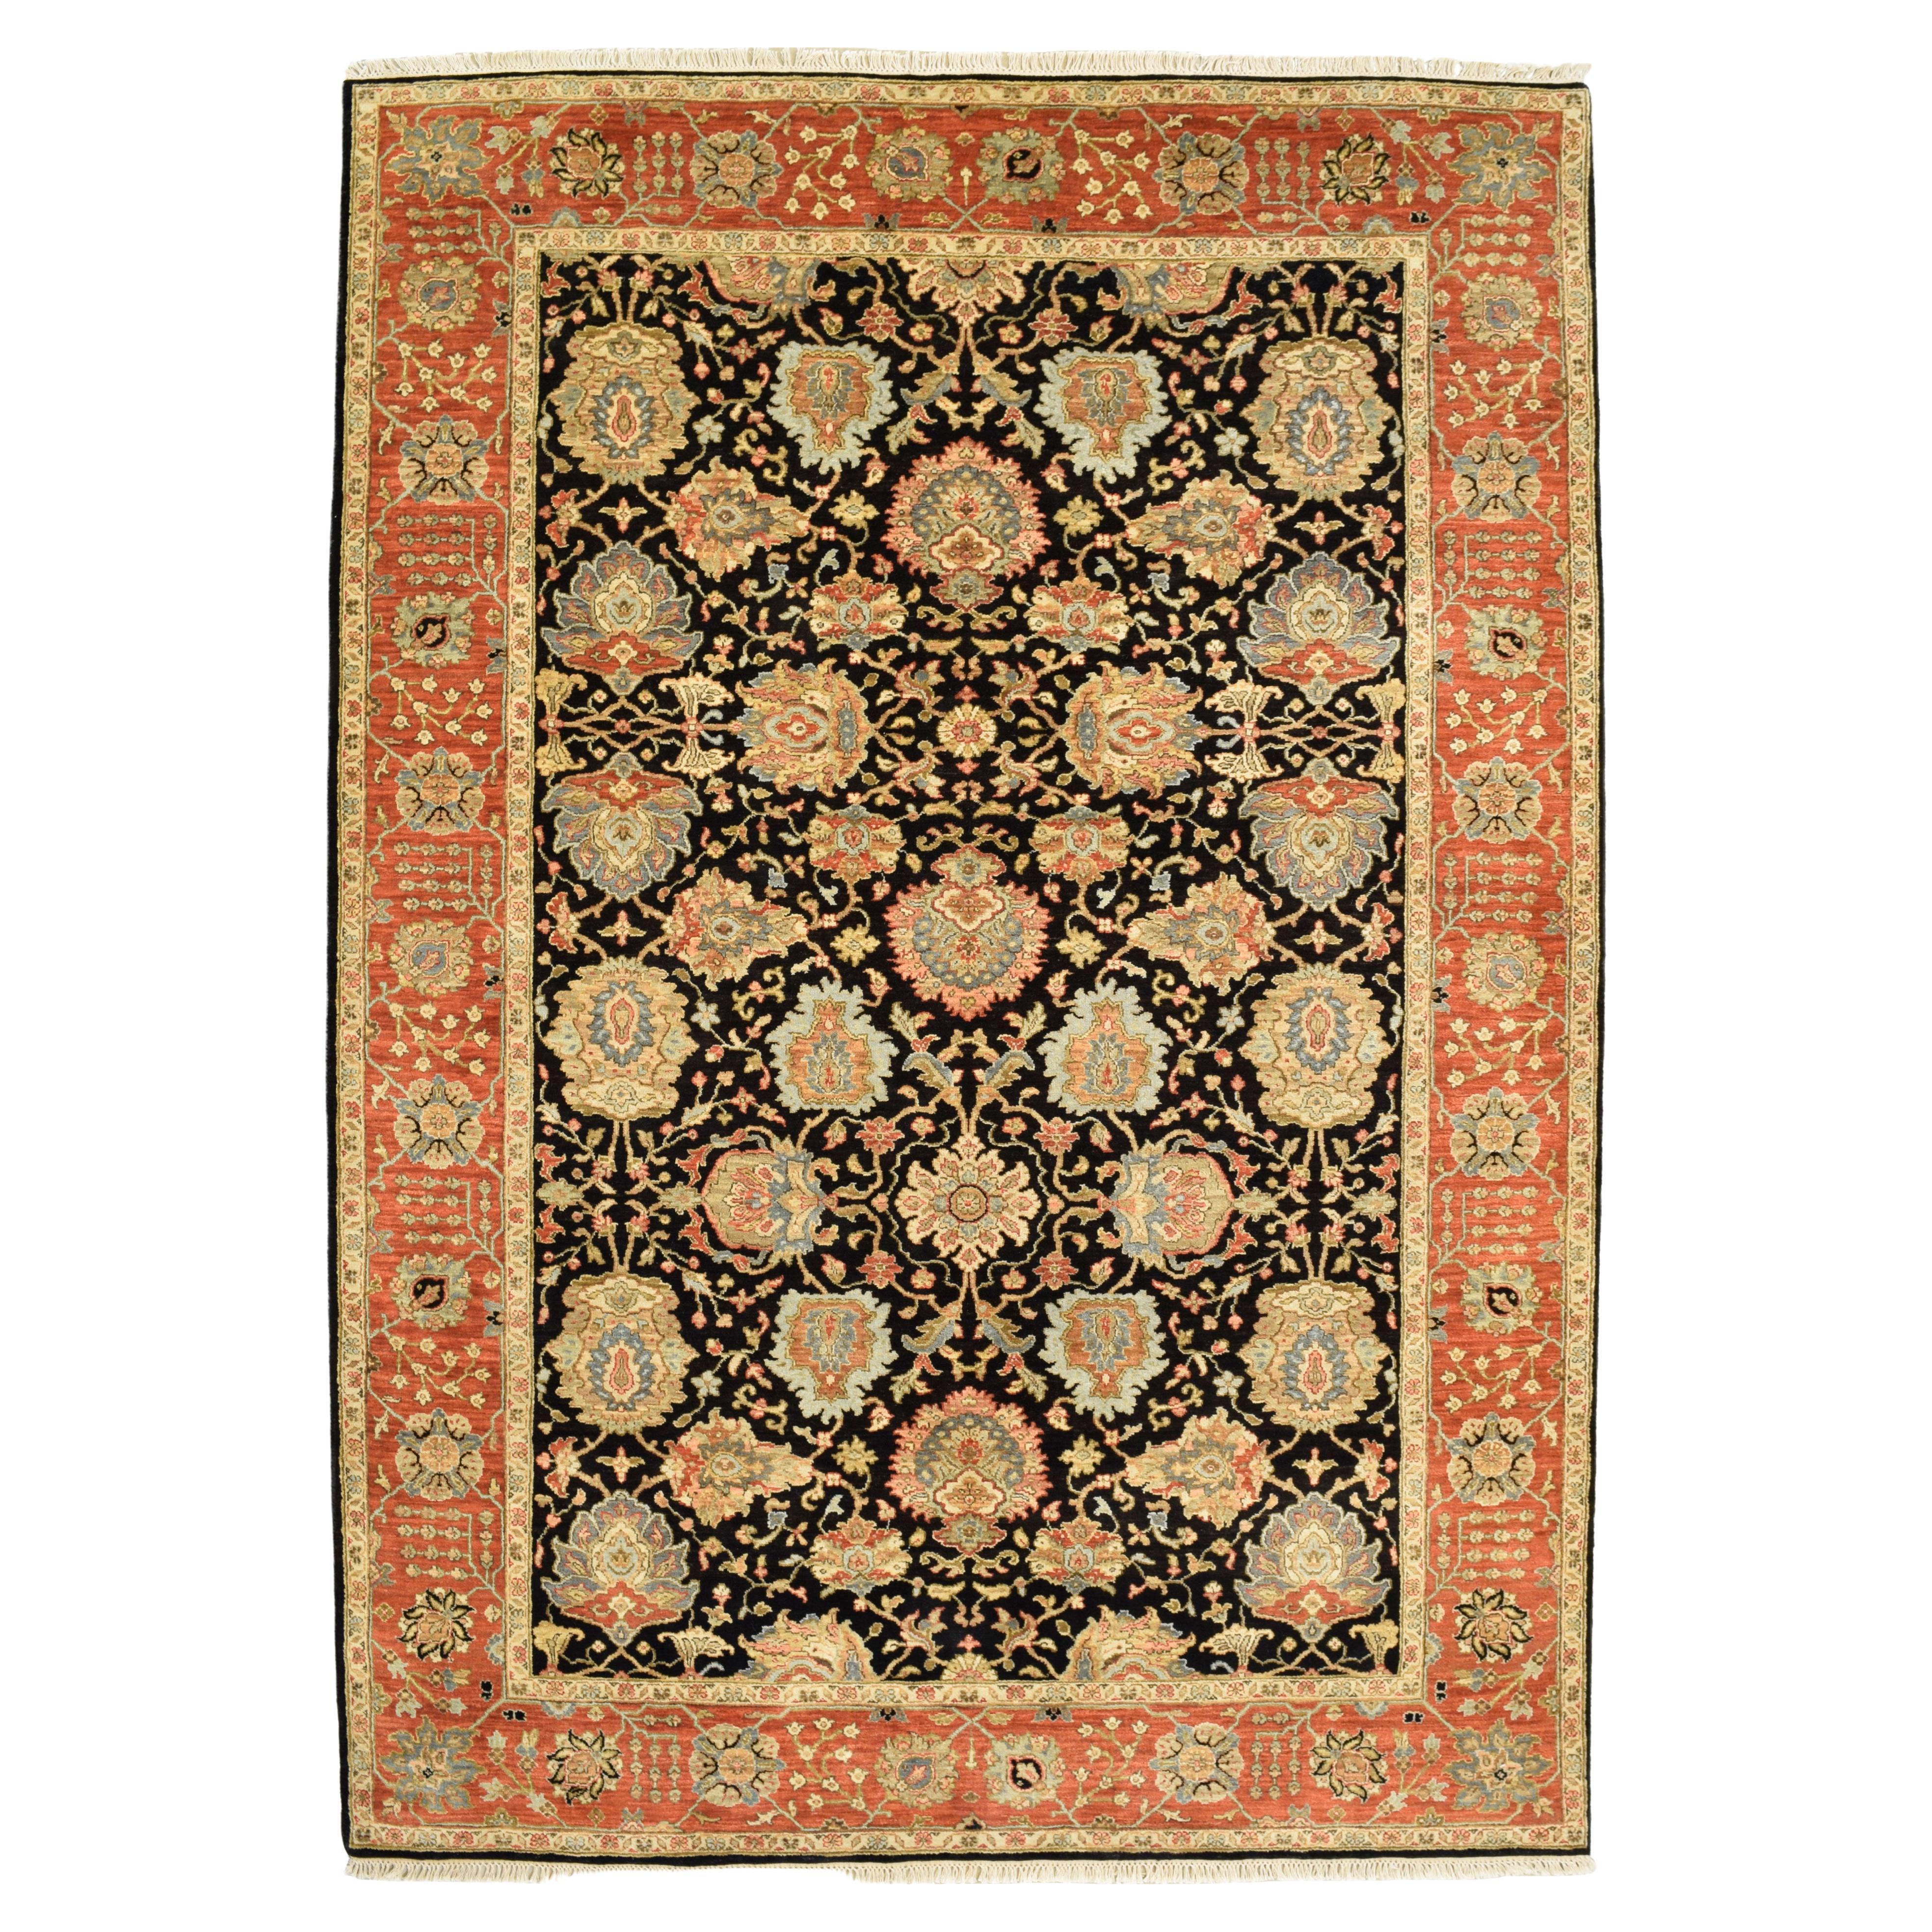 Hand-Knotted Persian Agra Carpet, Red, Orange, and Black Wool, 6' x 9'